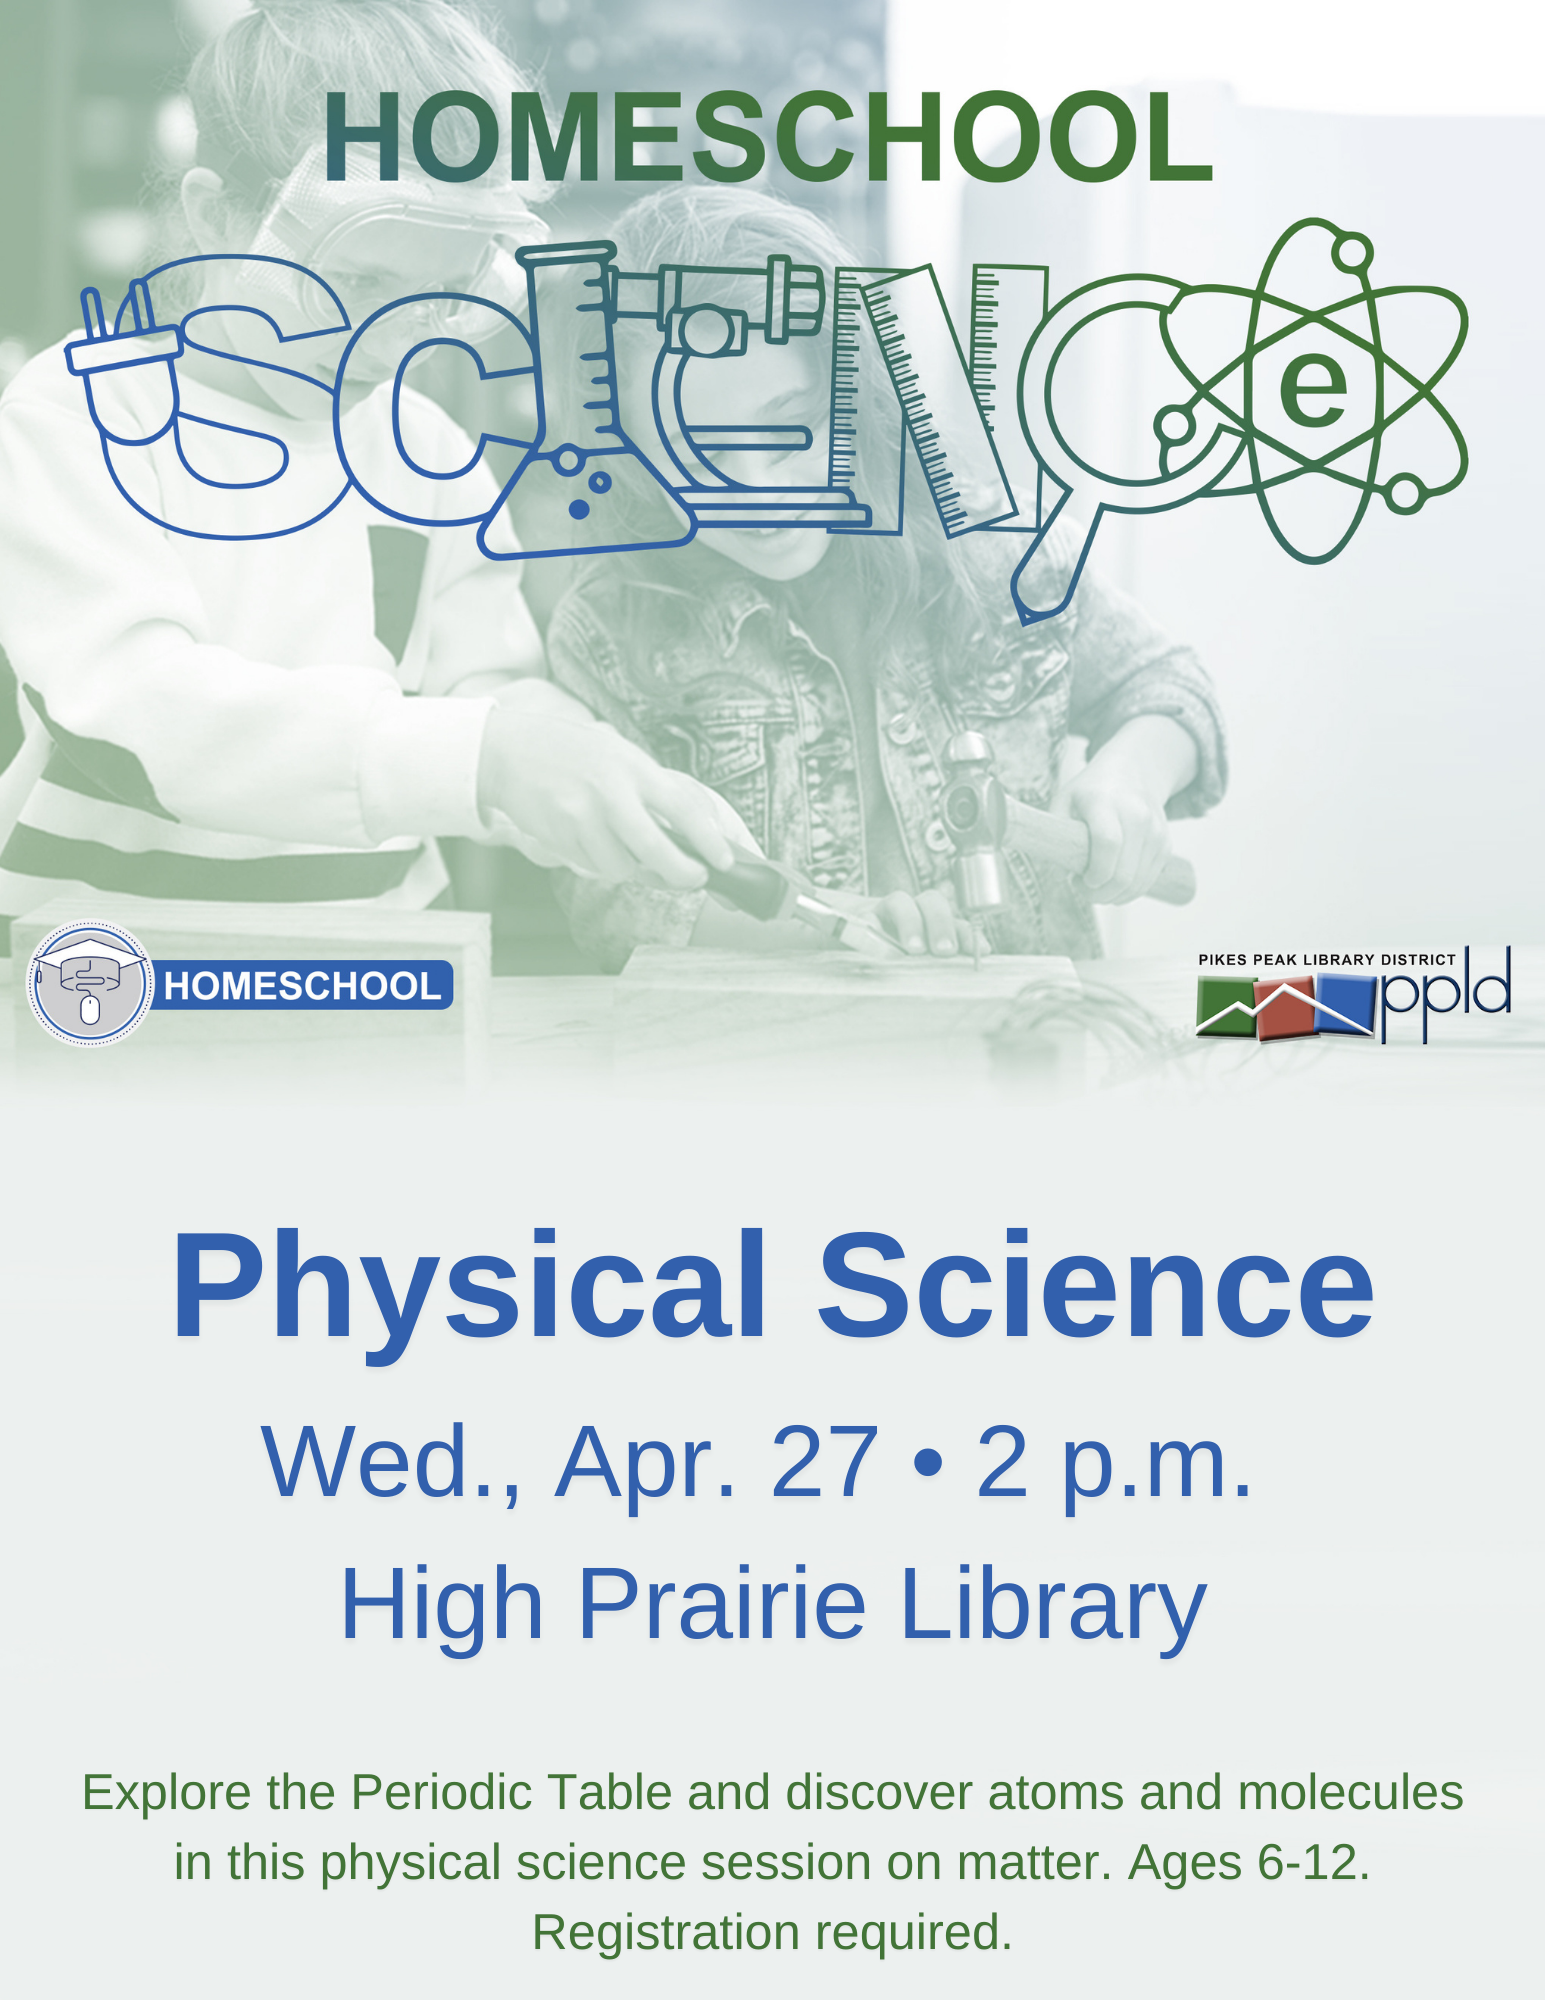 Homeschool Physical Science Flyer